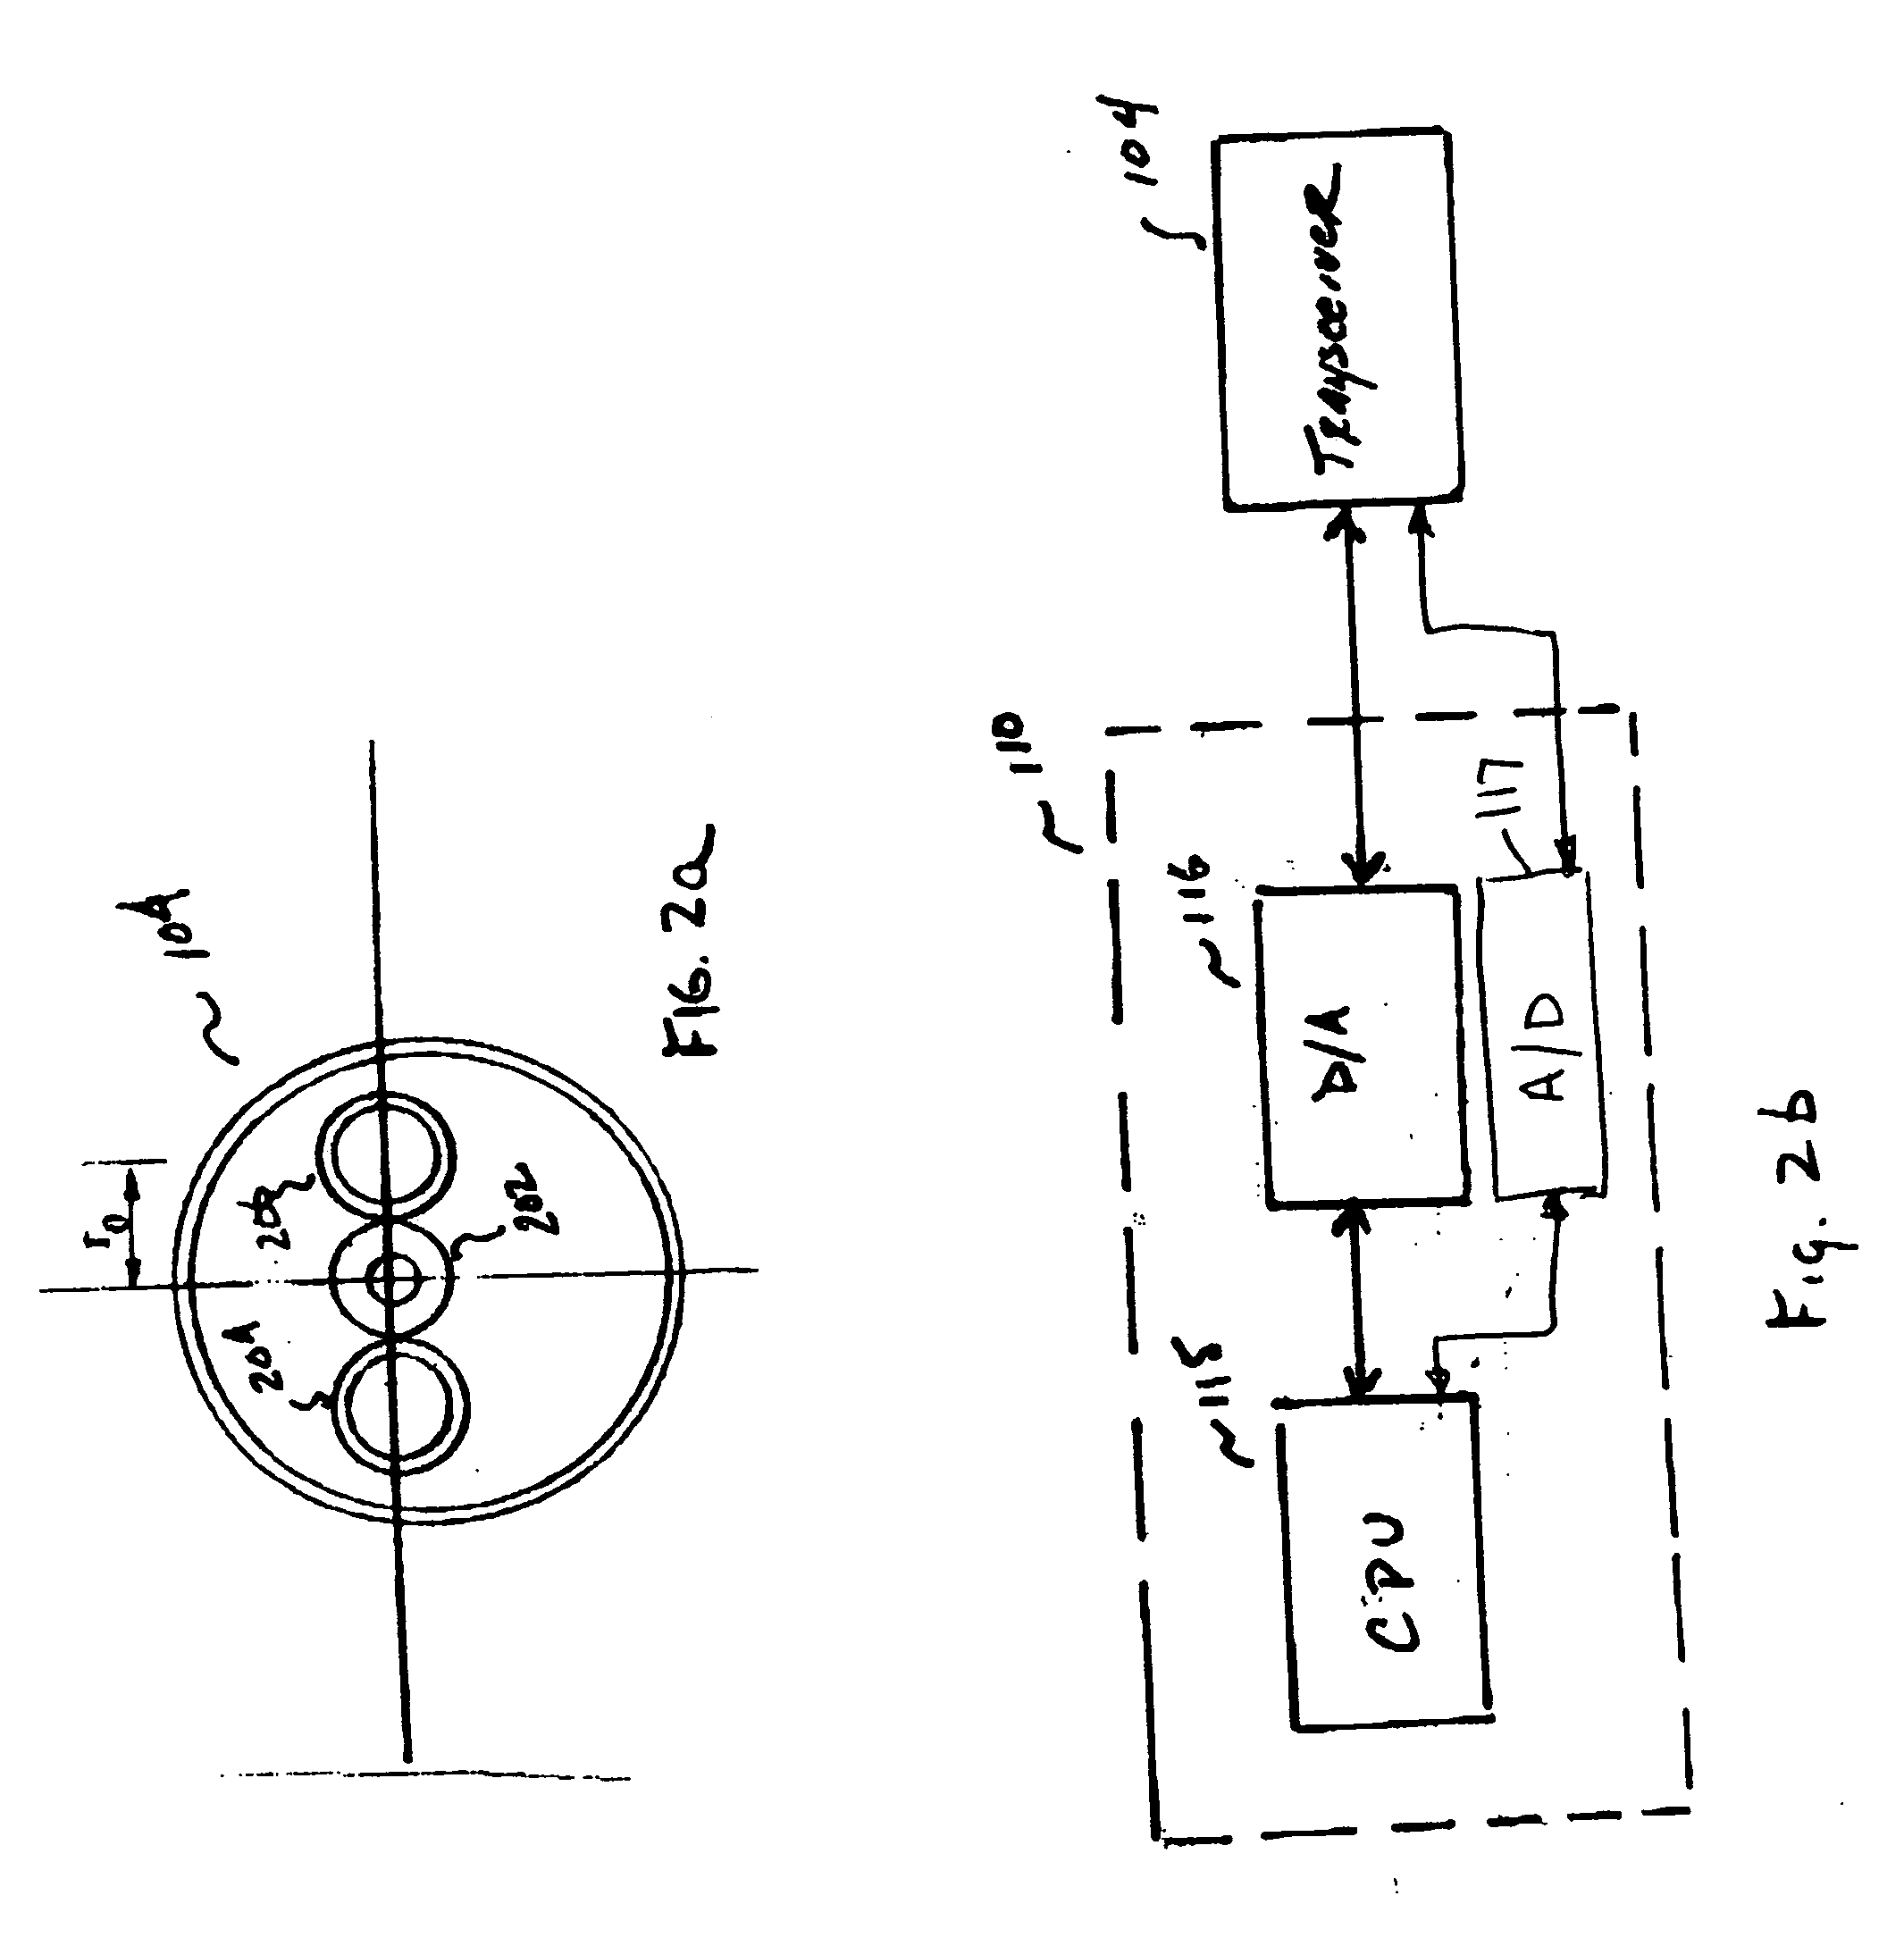 System and method for the measurement of the velocity and acceleration of objects